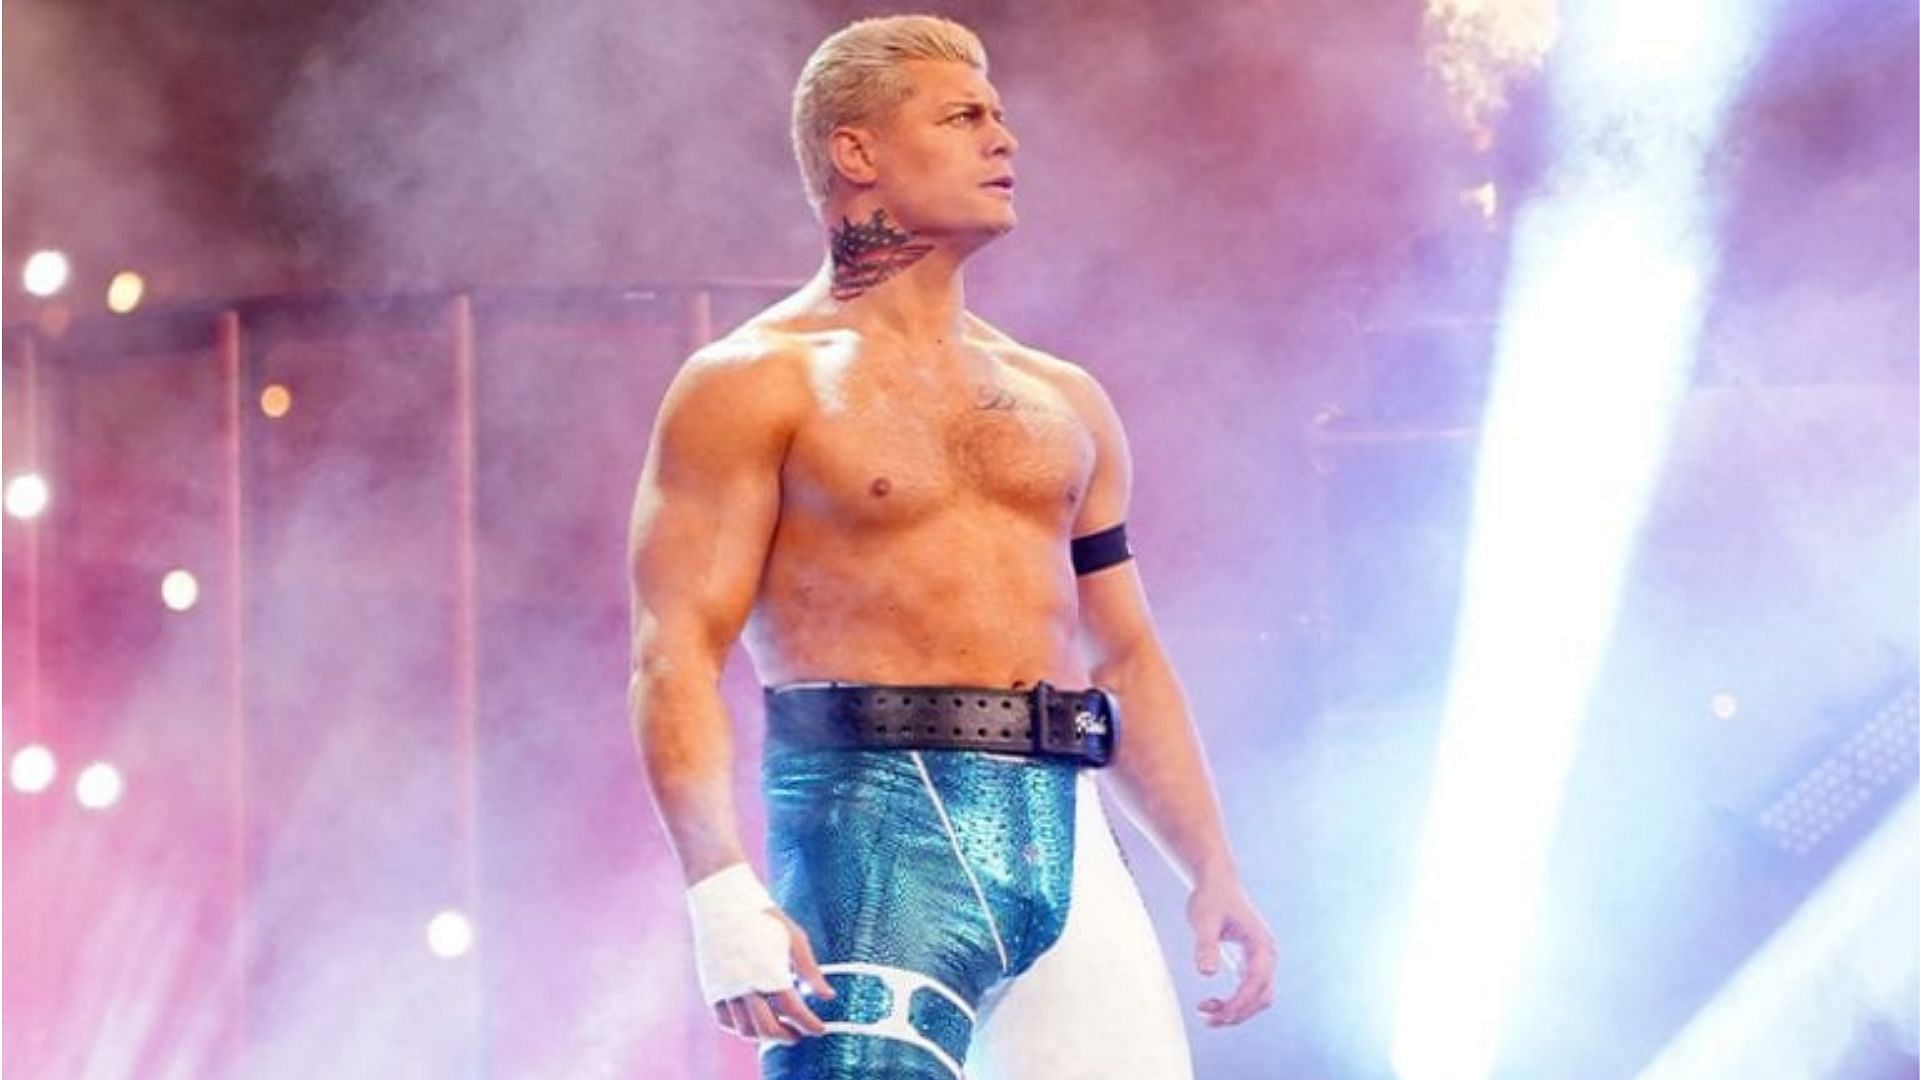 Cody Rhodes making his entrance in AEW